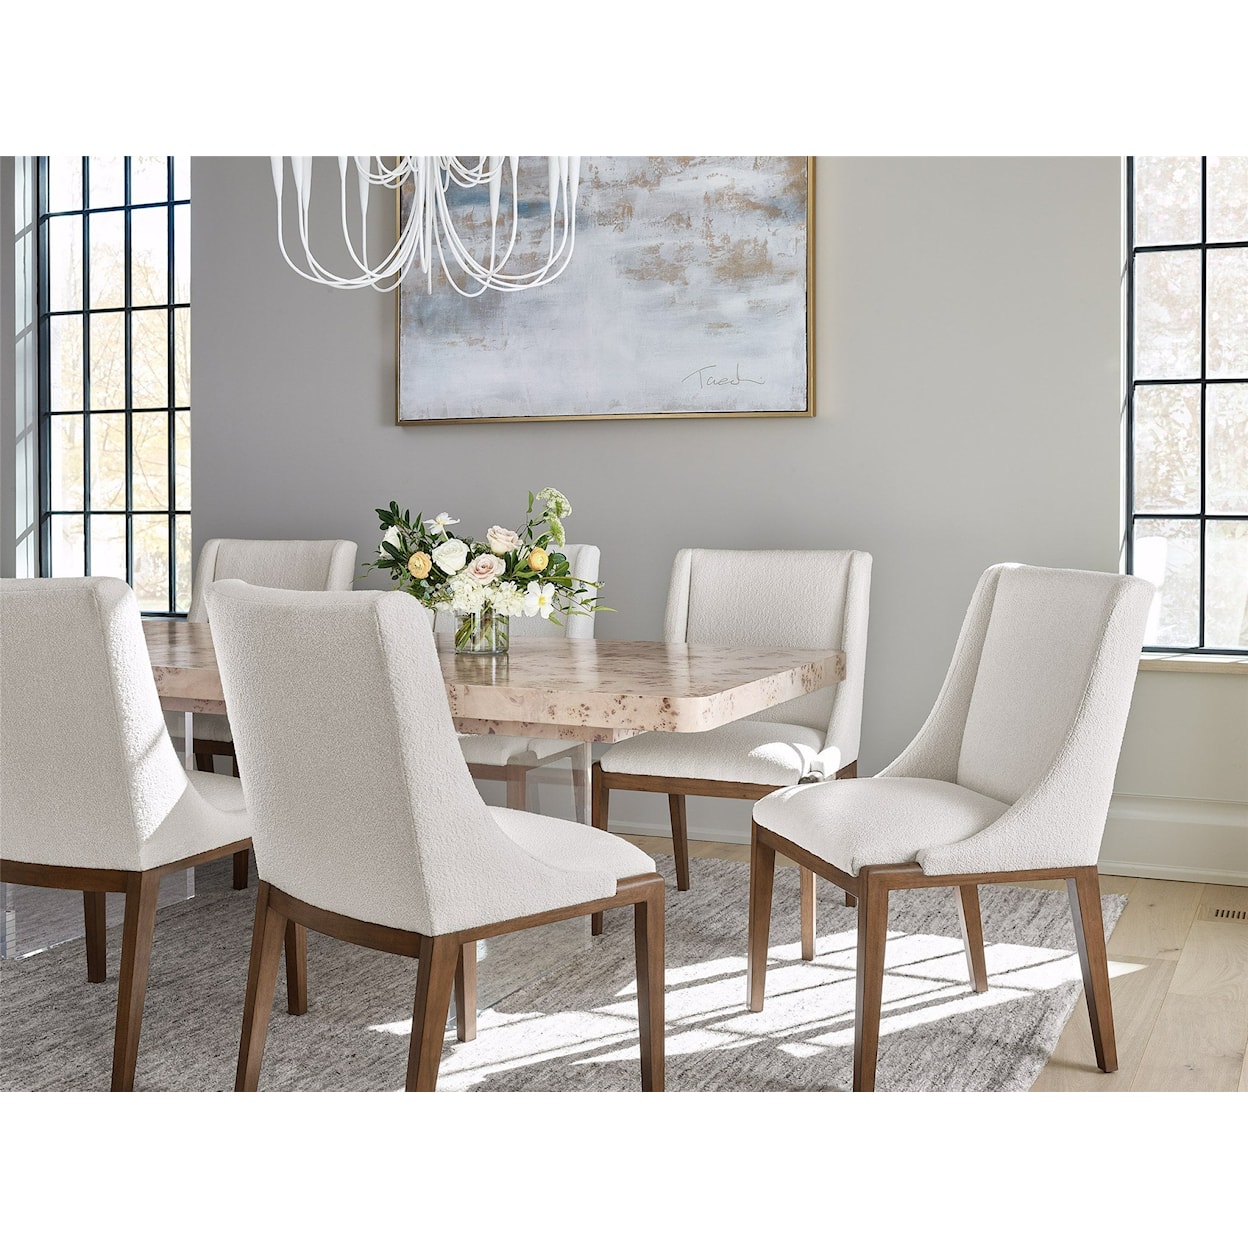 Universal Tranquility - Miranda Kerr Home Tranquility Dining Chair